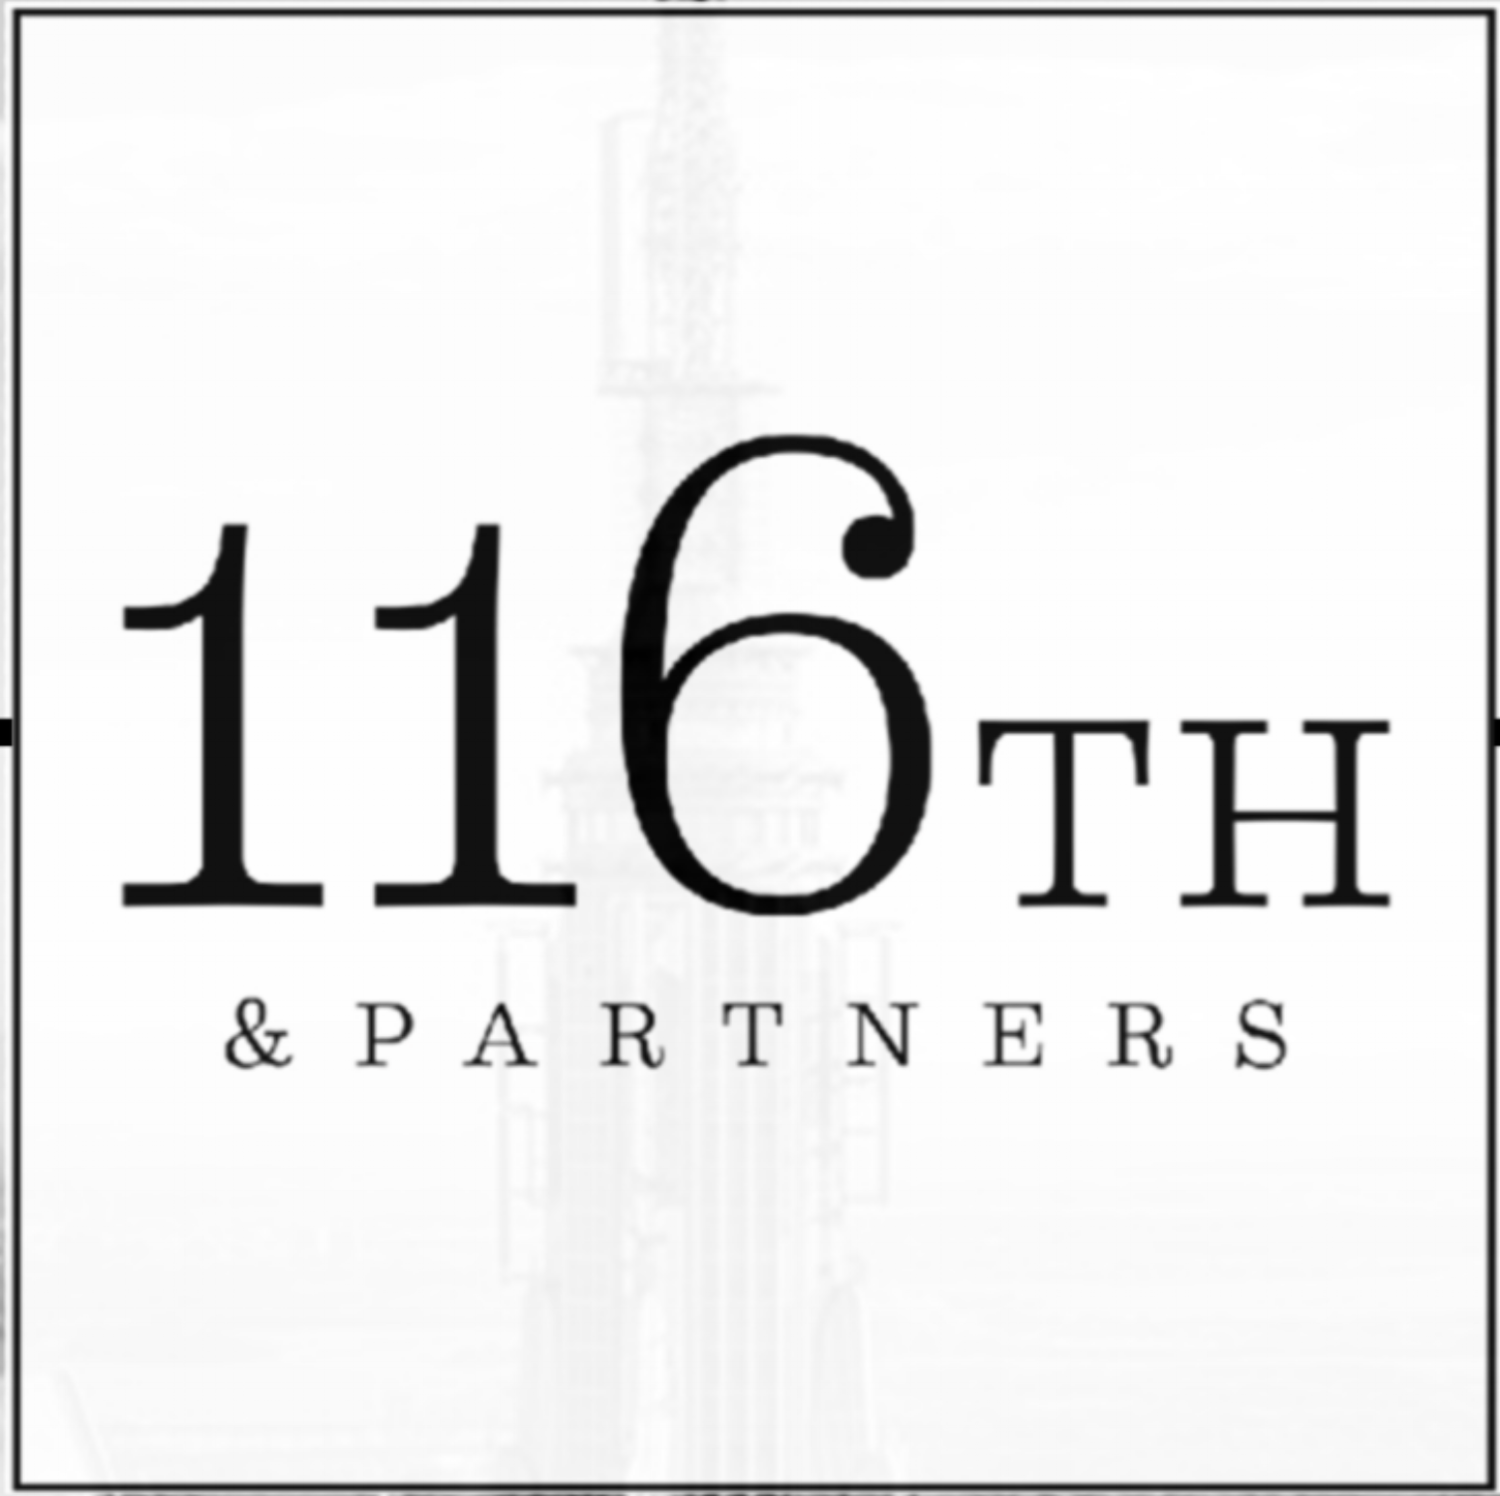 116th & Partners